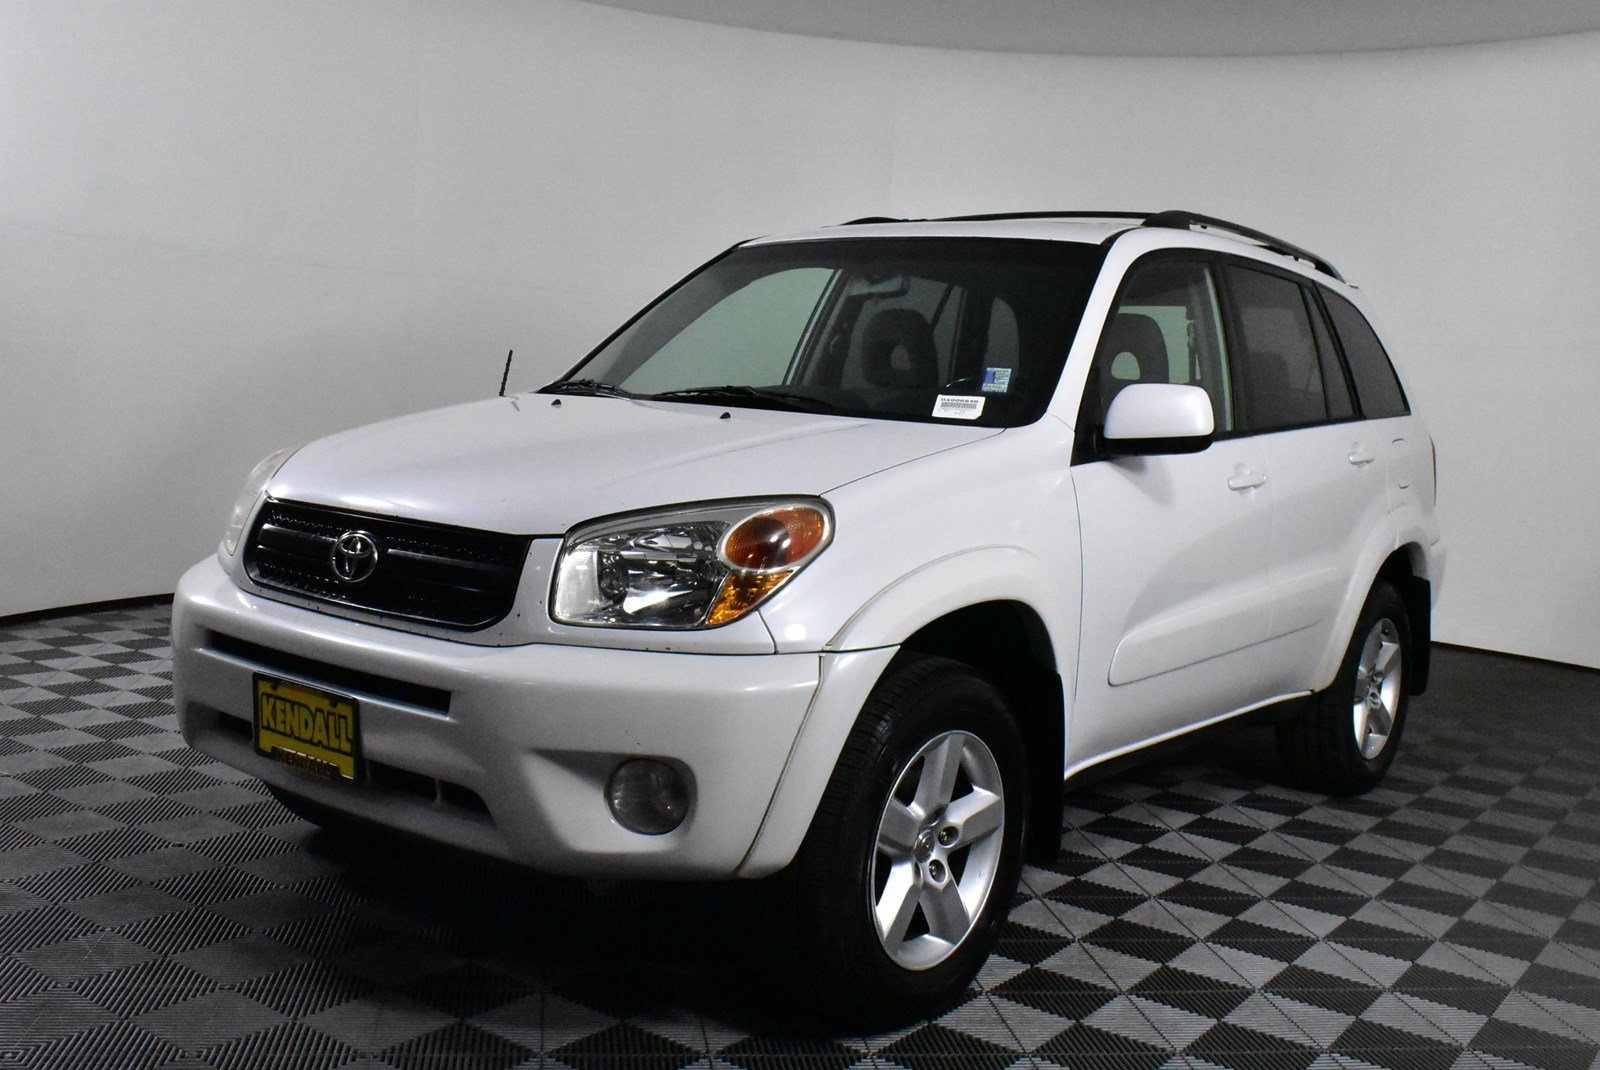 Pre-Owned 2005 Toyota RAV4 4DR 4WD AT in Nampa #D490684B | Kendall Kia